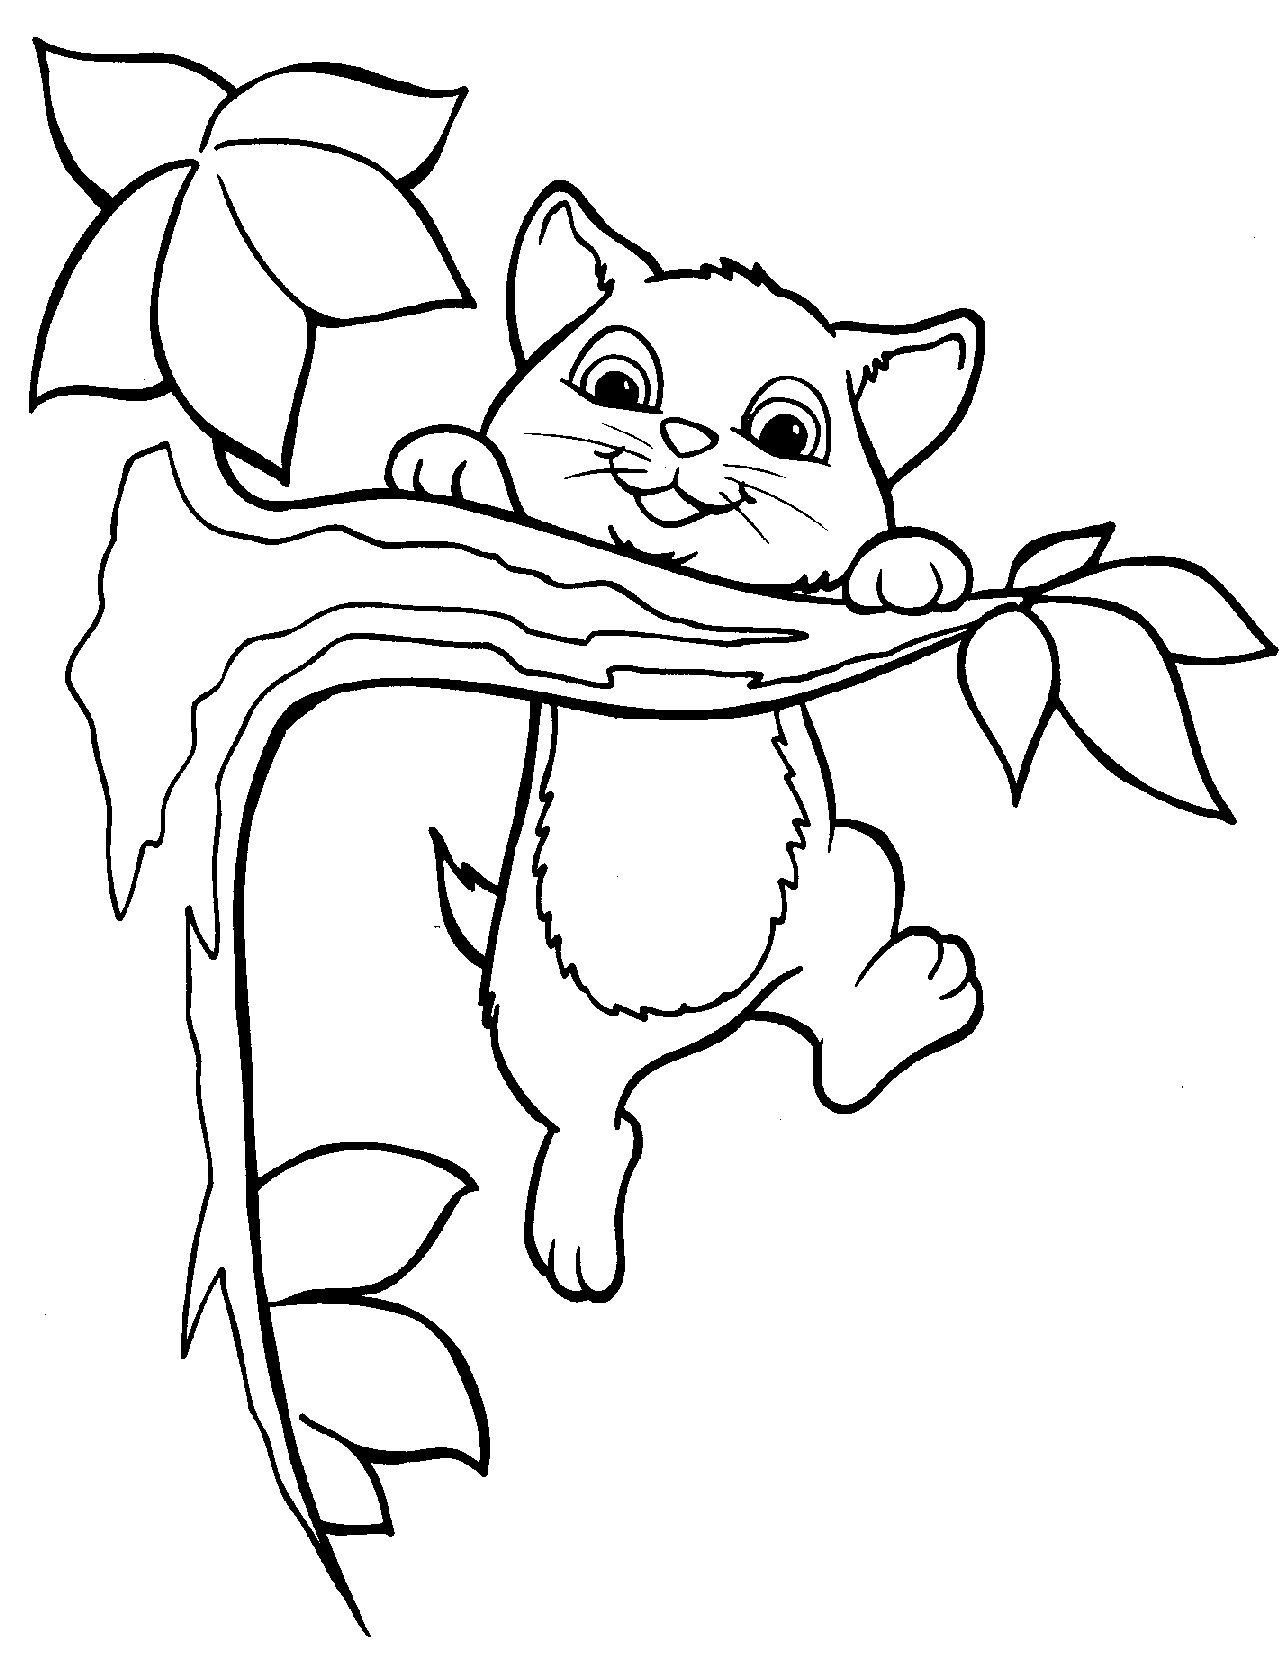 Playful Kitty Coloring Page